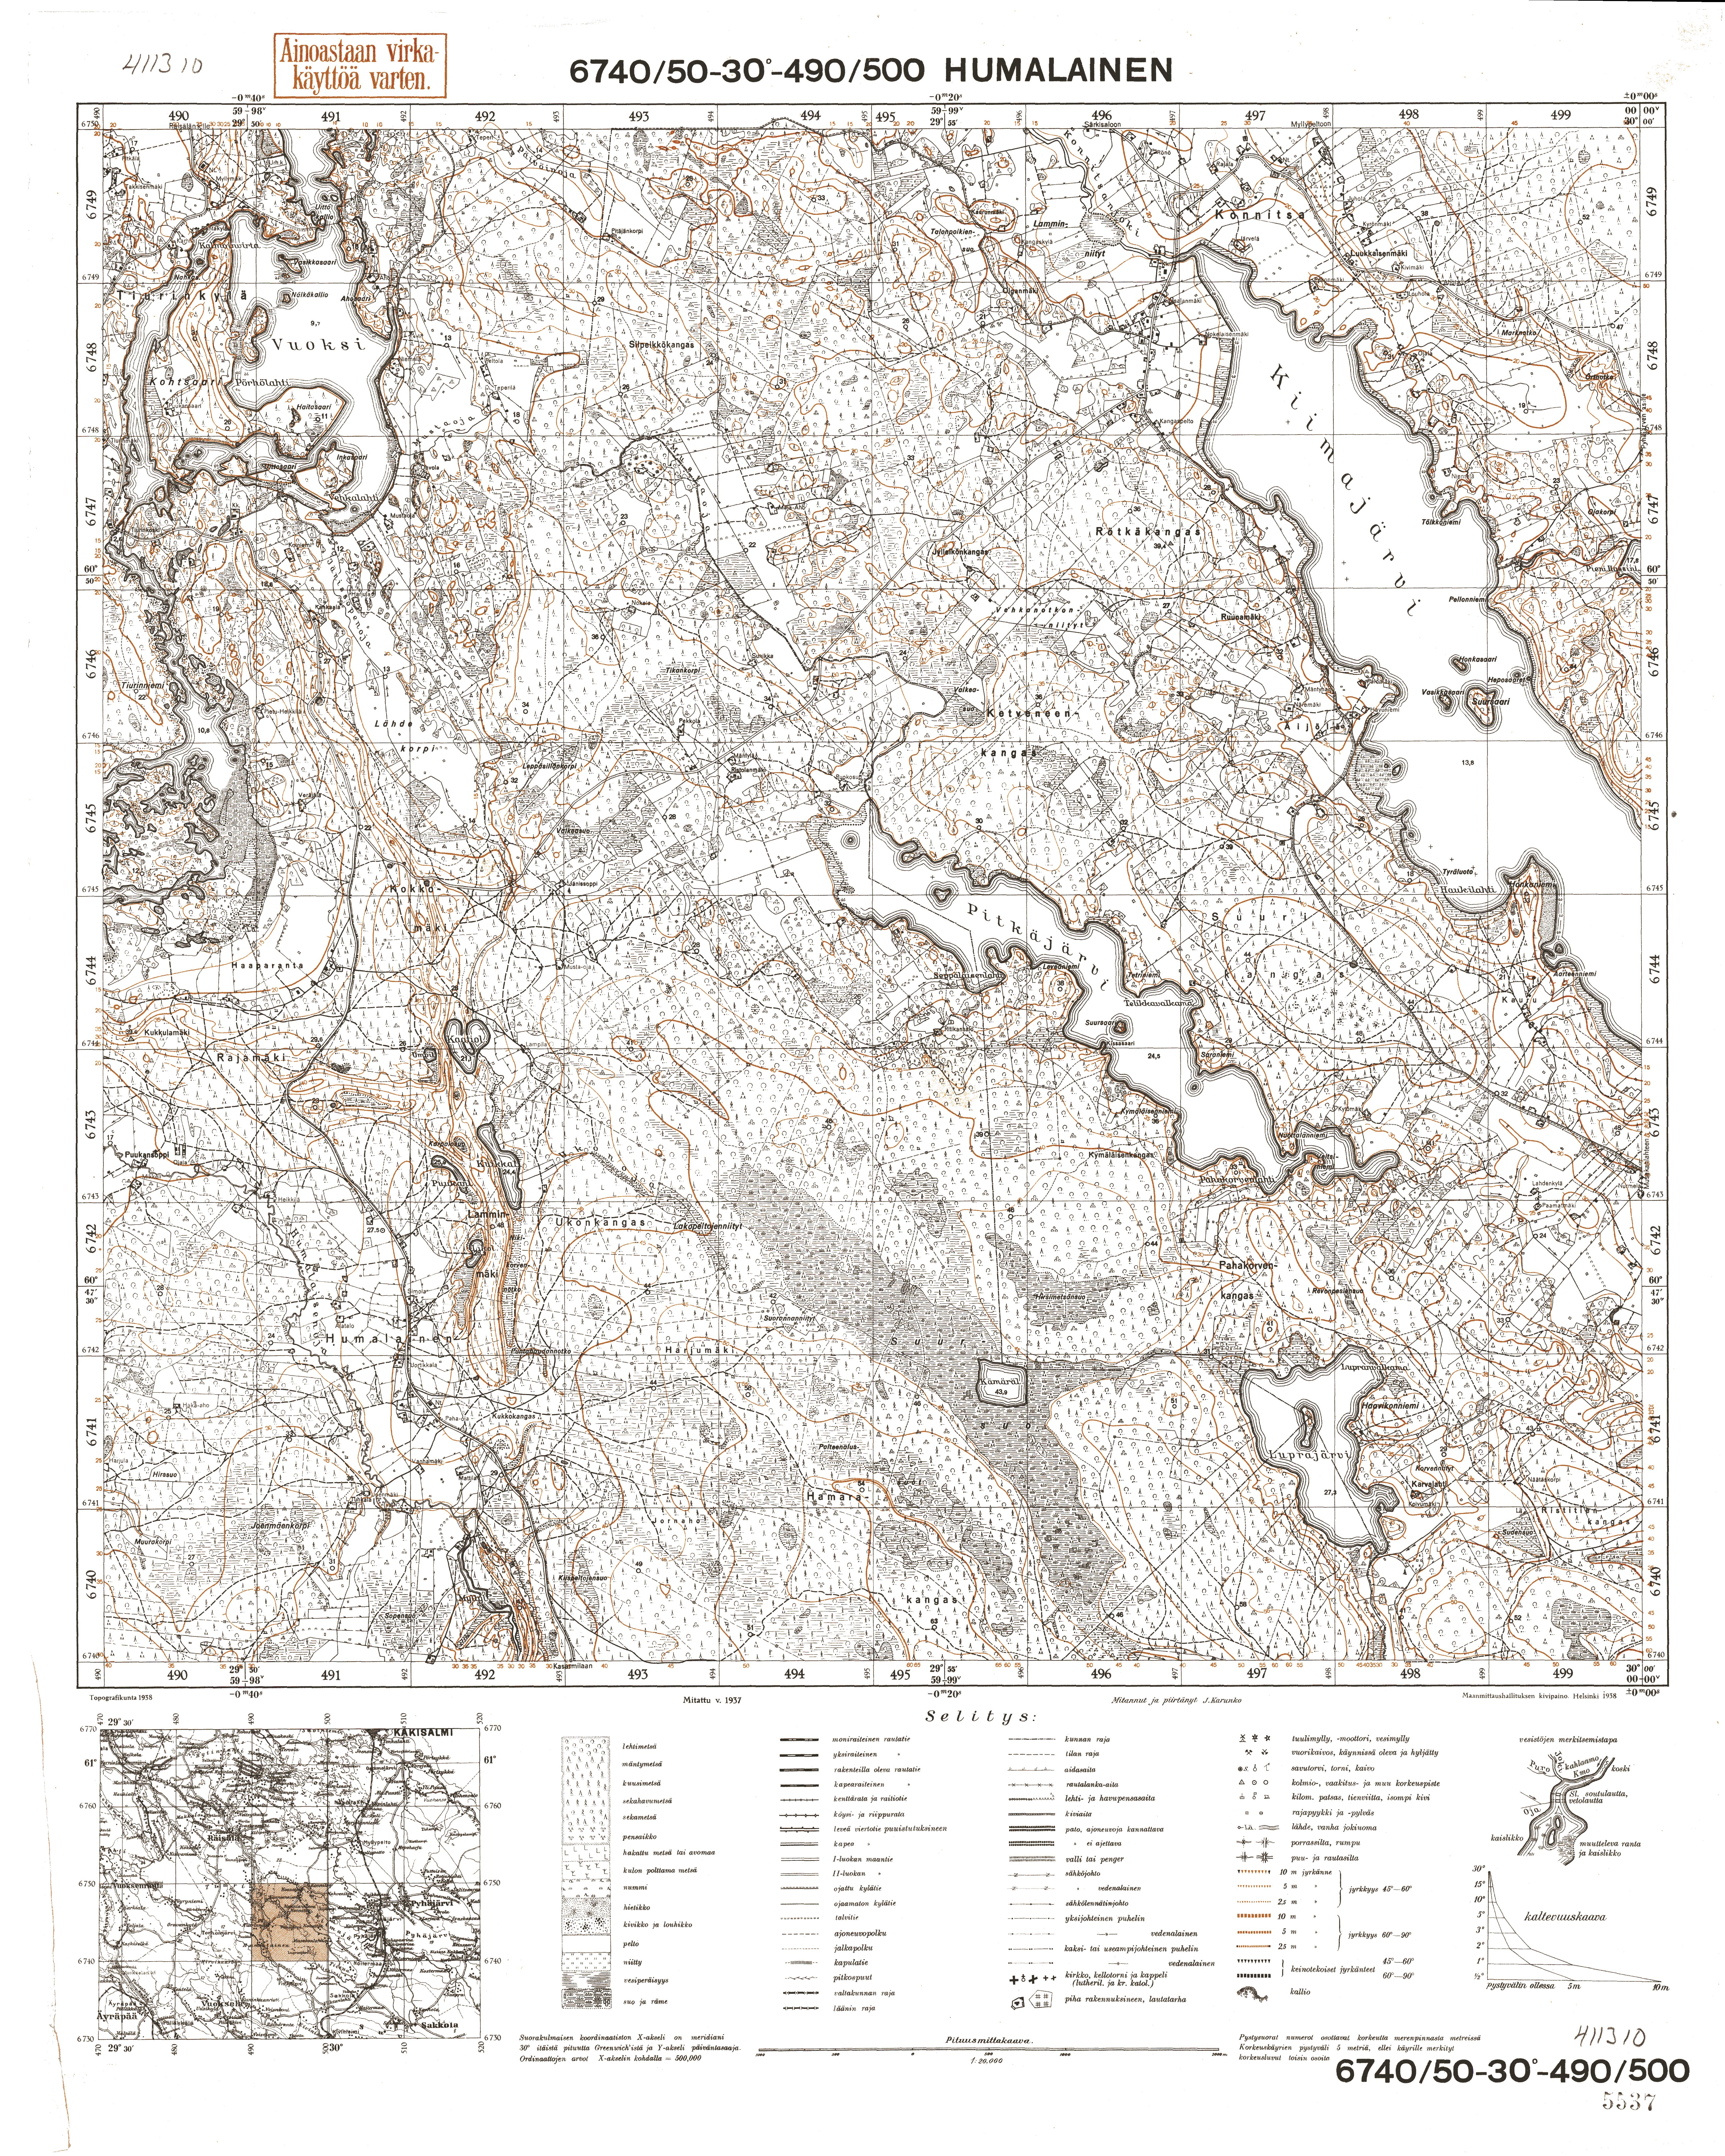 Humalainen. Topografikartta 411310. Topographic map from 1939. Use the zooming tool to explore in higher level of detail. Obtain as a quality print or high resolution image